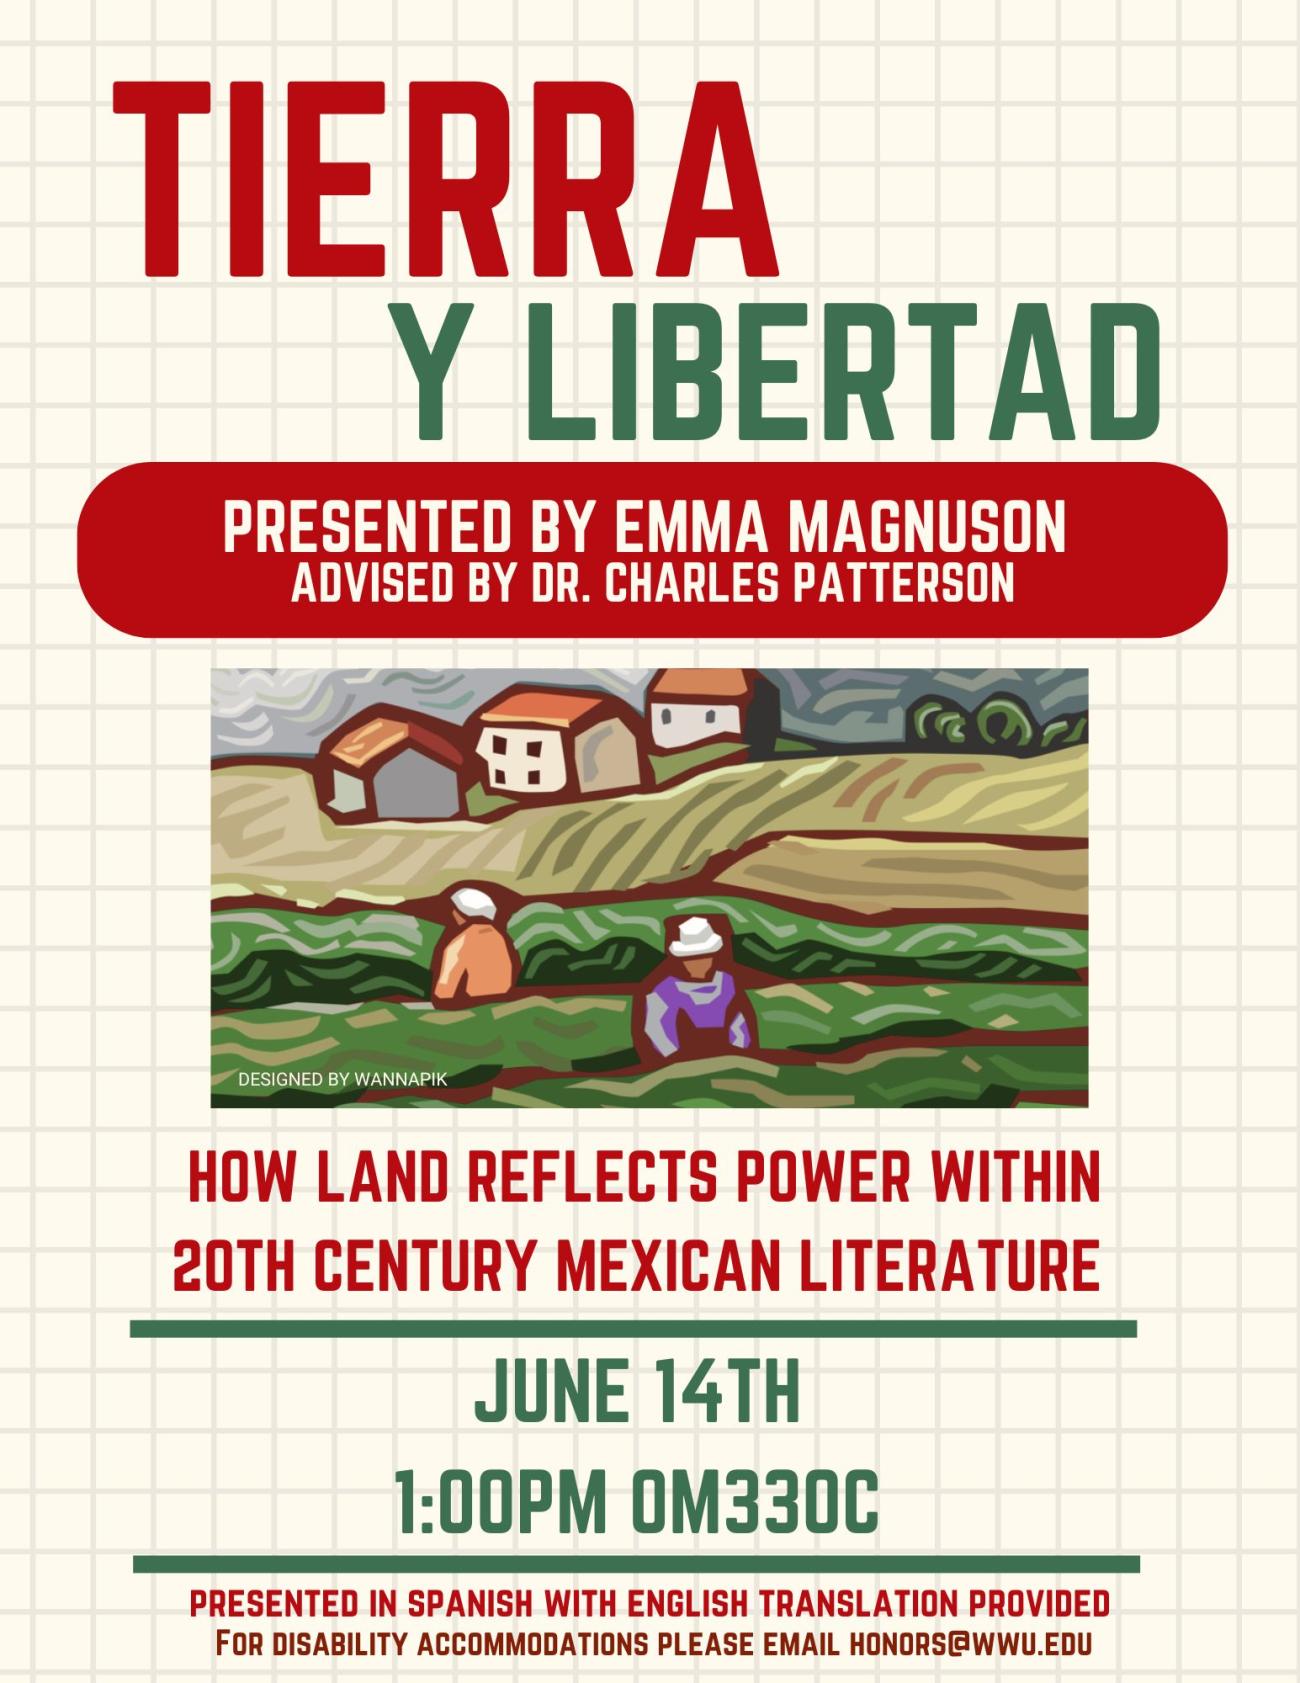 A faded Van Gogh style cartoon of farmworkers in a field with three houses sits in the middle of the poster. The text reads "Tierra y libertad" (translated to land and liberty) Presented by Emma Magnuson. Advised by Dr. Charles Patterson. How Land Reflects Power within 20th Century Mexican Literature. June 1th, 1:00pm, Old Main 330C. Presented in Spanish with English translation provided. For disability accommodations please email honors@wwu.edu